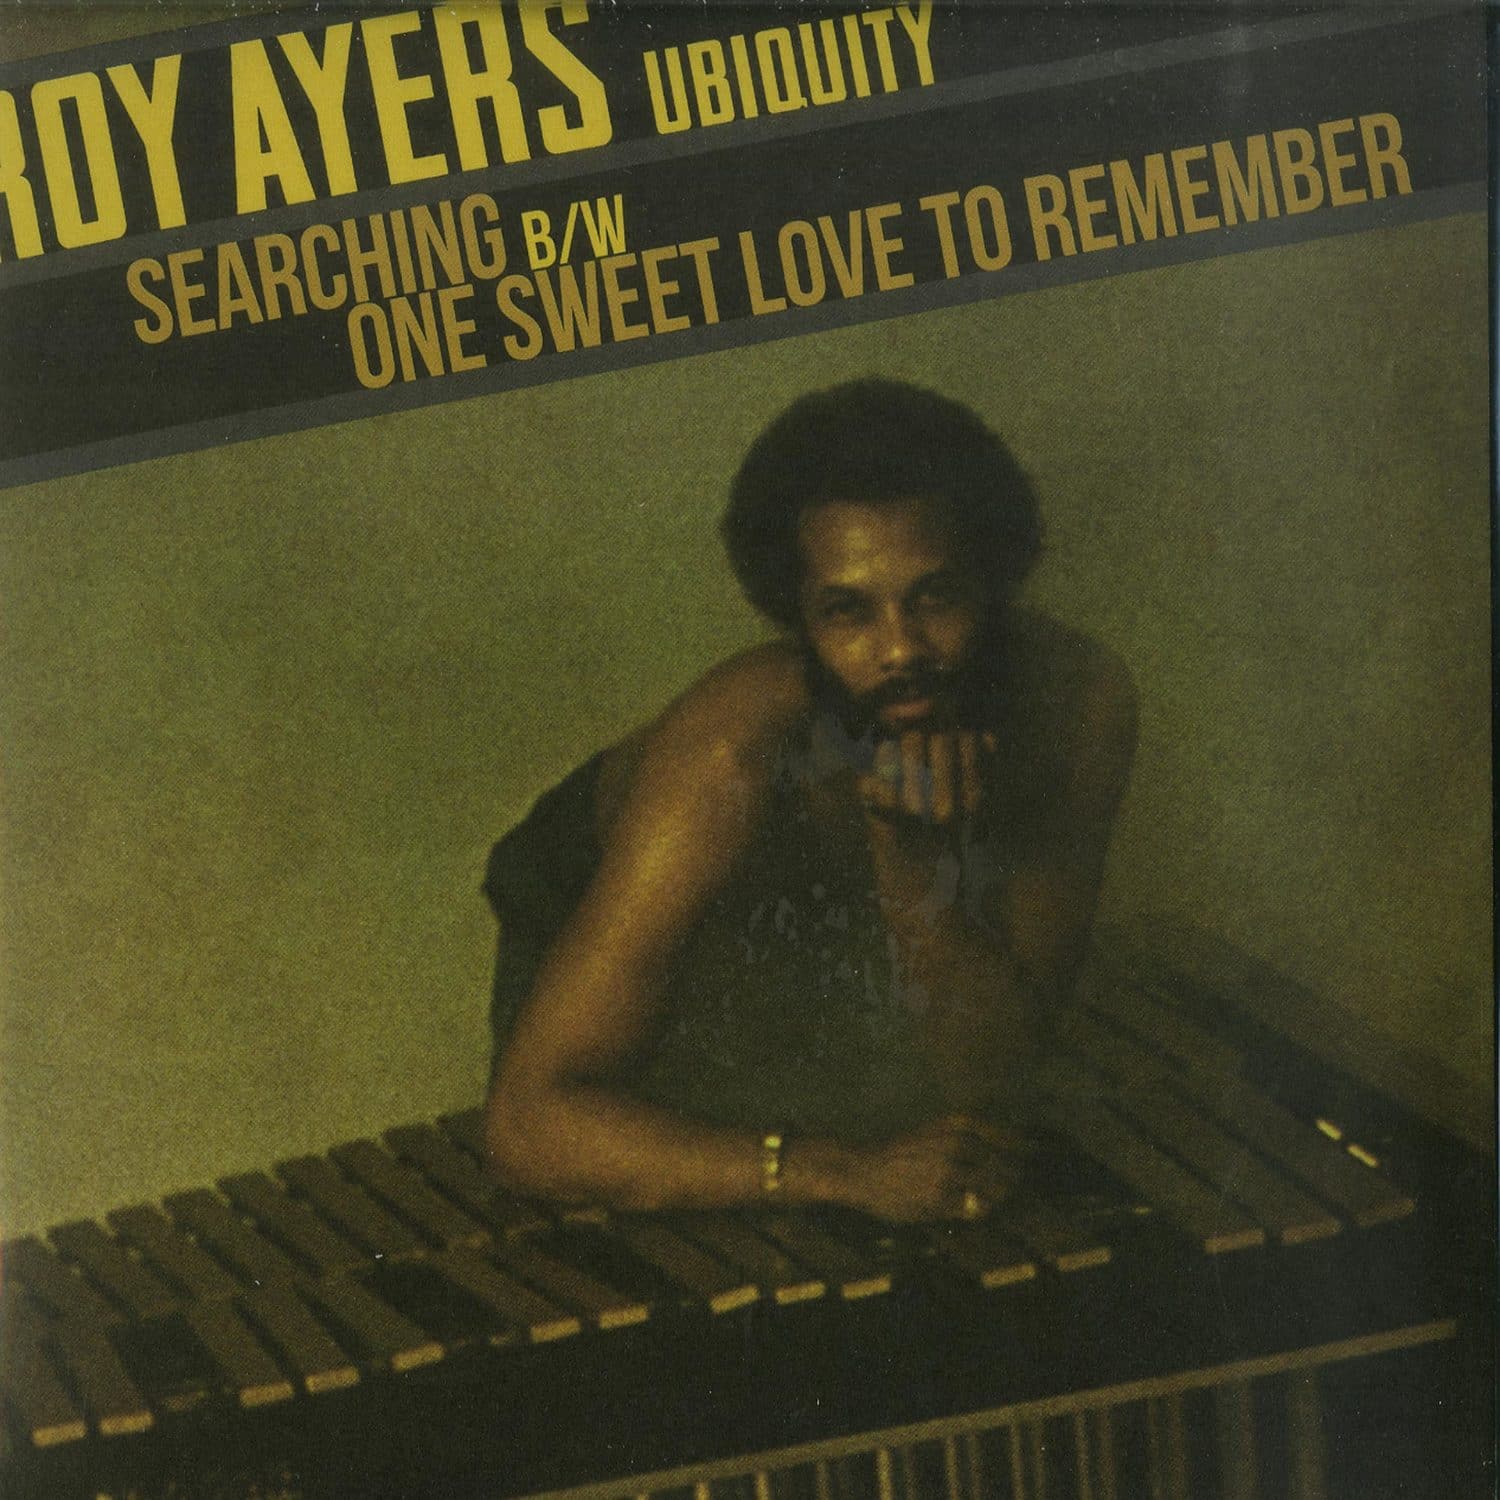 Roy Ayers Ubiquity - SEARCHING / ONE SWEET LOVE TO REMEMBER 